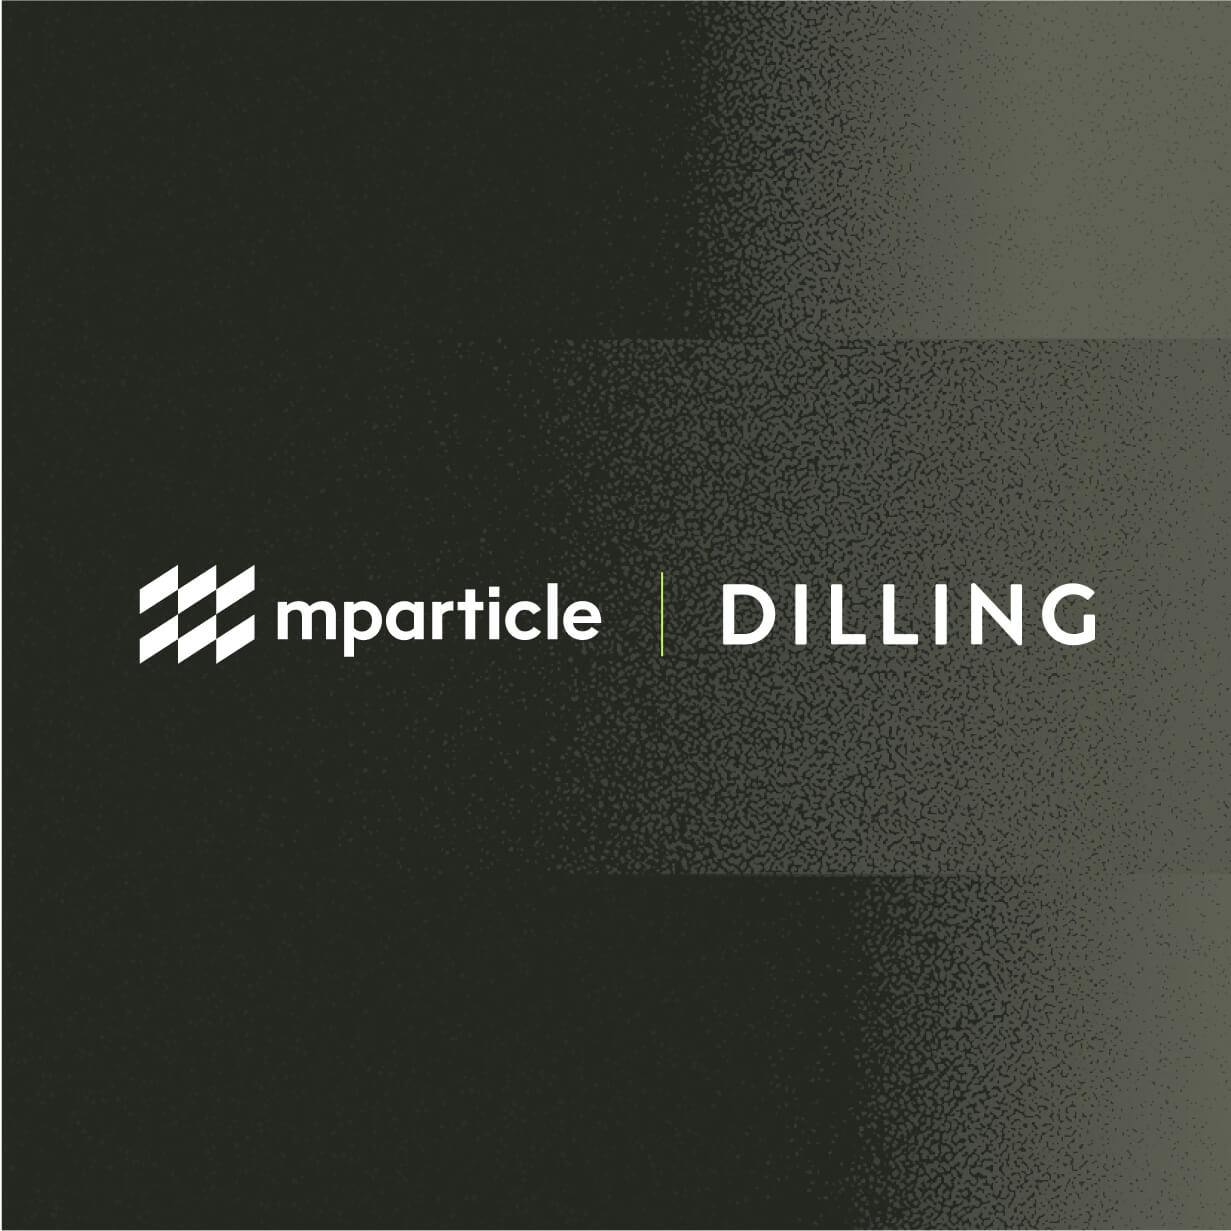 DILLING lays the foundation for tailored experiences with mParticle Customer Data Platform